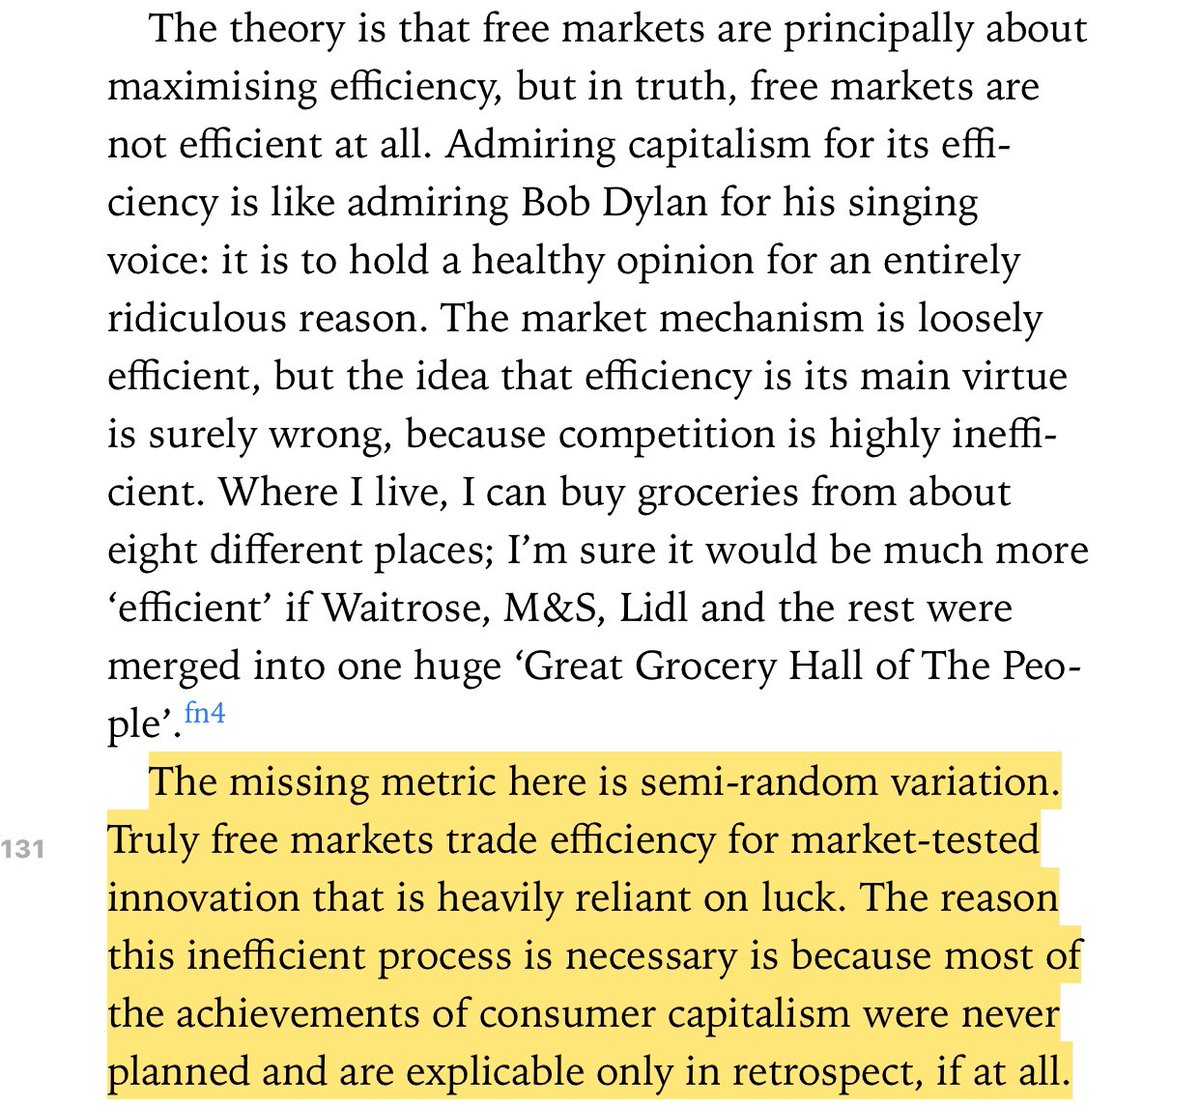 “Truly free markets trade efficiency for market-rested innovation that is heavily reliant on luck. The reason this inefficient process is necessary is because most of the achievements of consumer capitalism were never planned and are explicable only in retrospect.”